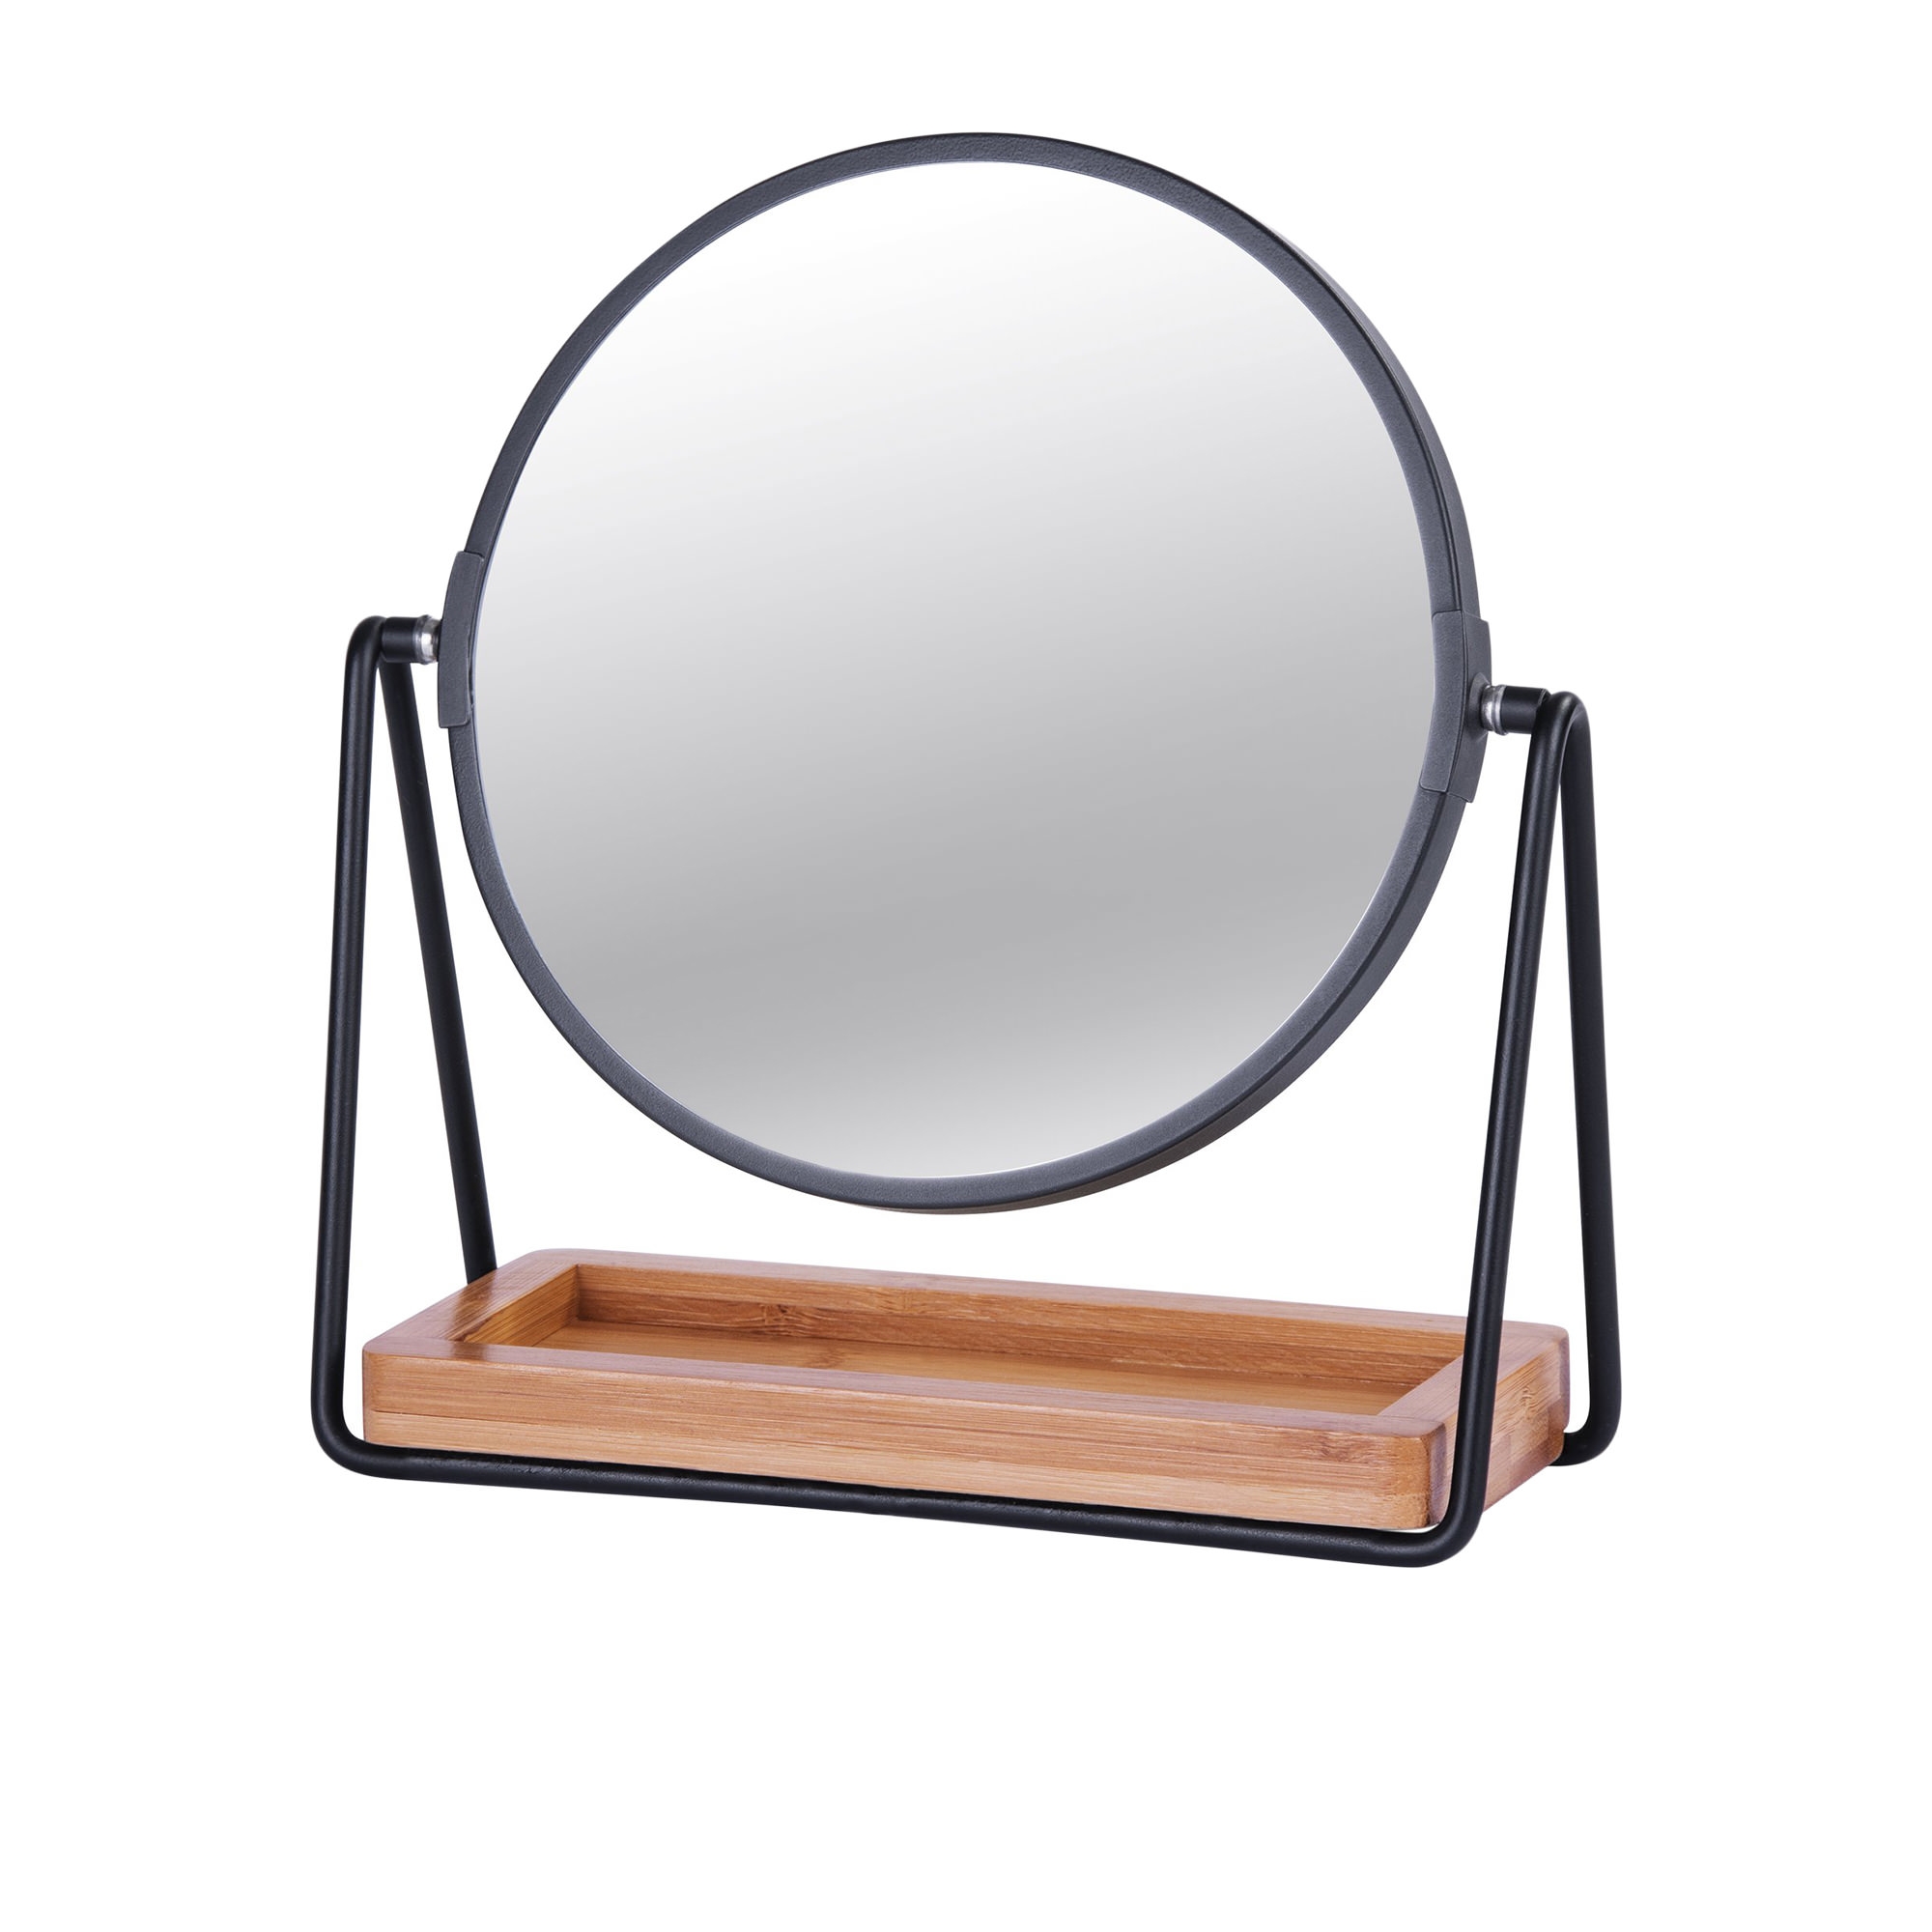 Clevinger Milan Round Vanity Mirror with Bamboo Tray Black Image 1